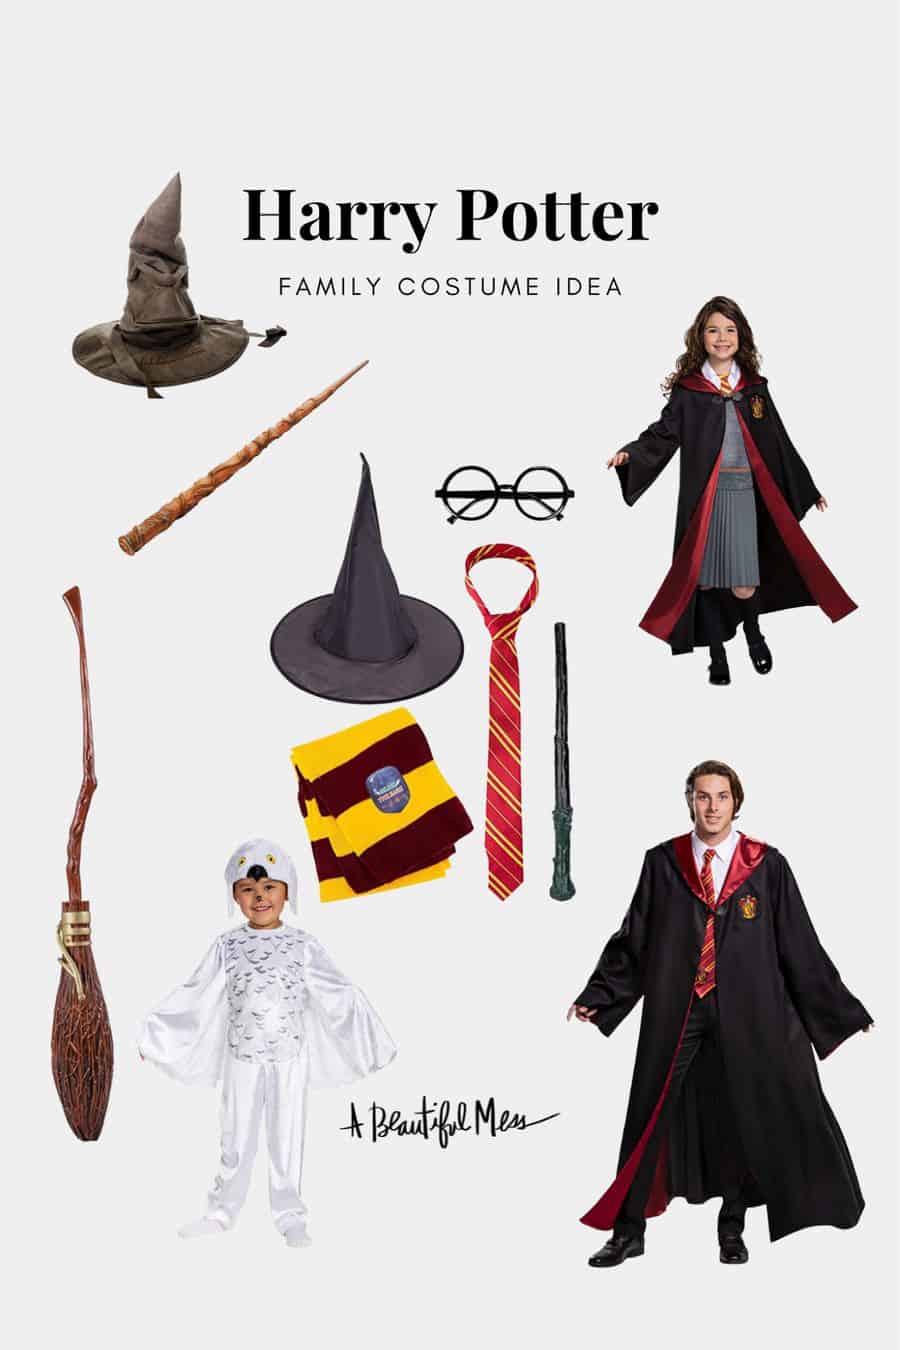 Family halloween costume ideas from Harry Potter